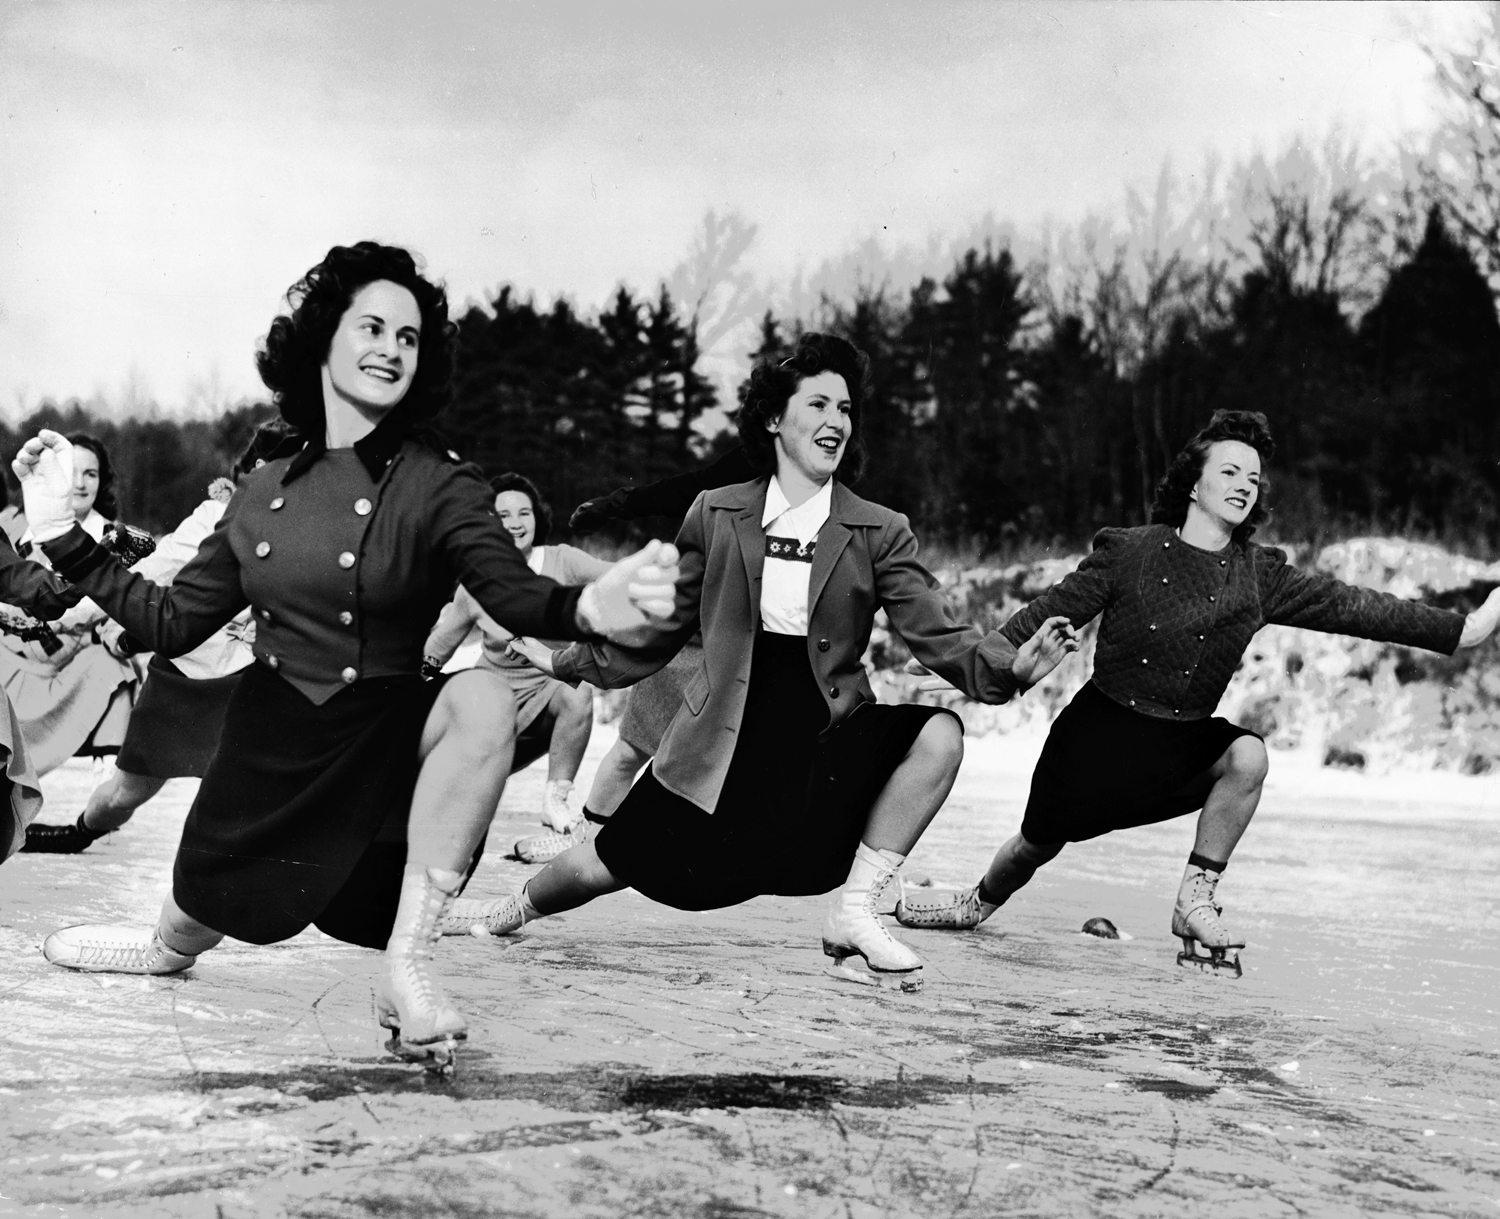 Coeds at the University of New Hampshire ice skate as part of intensive, wartime physical education program, 1942.